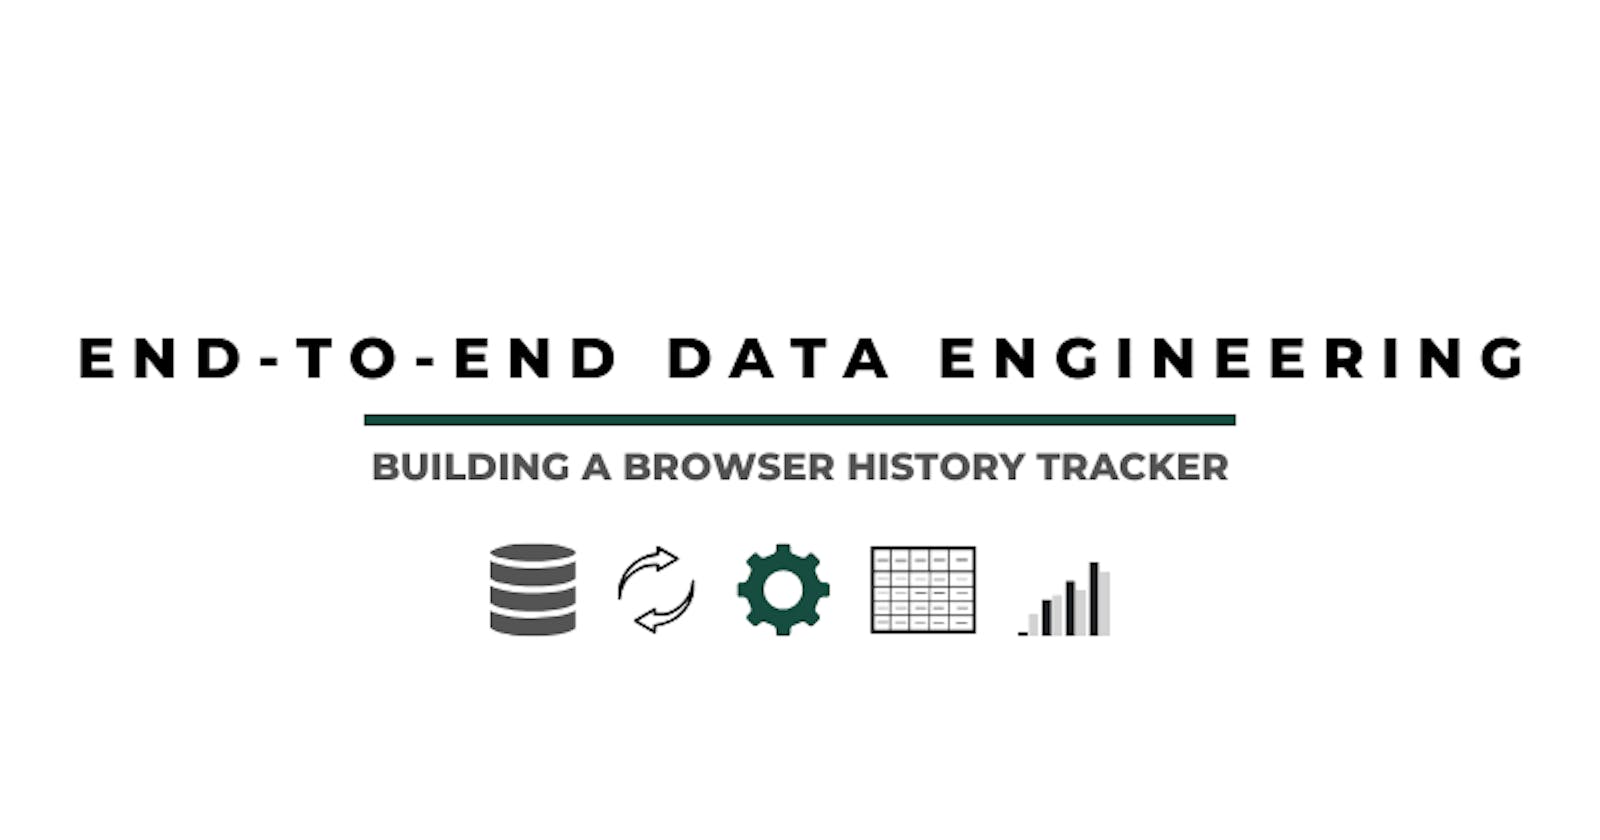 Building a Browser History Tracker